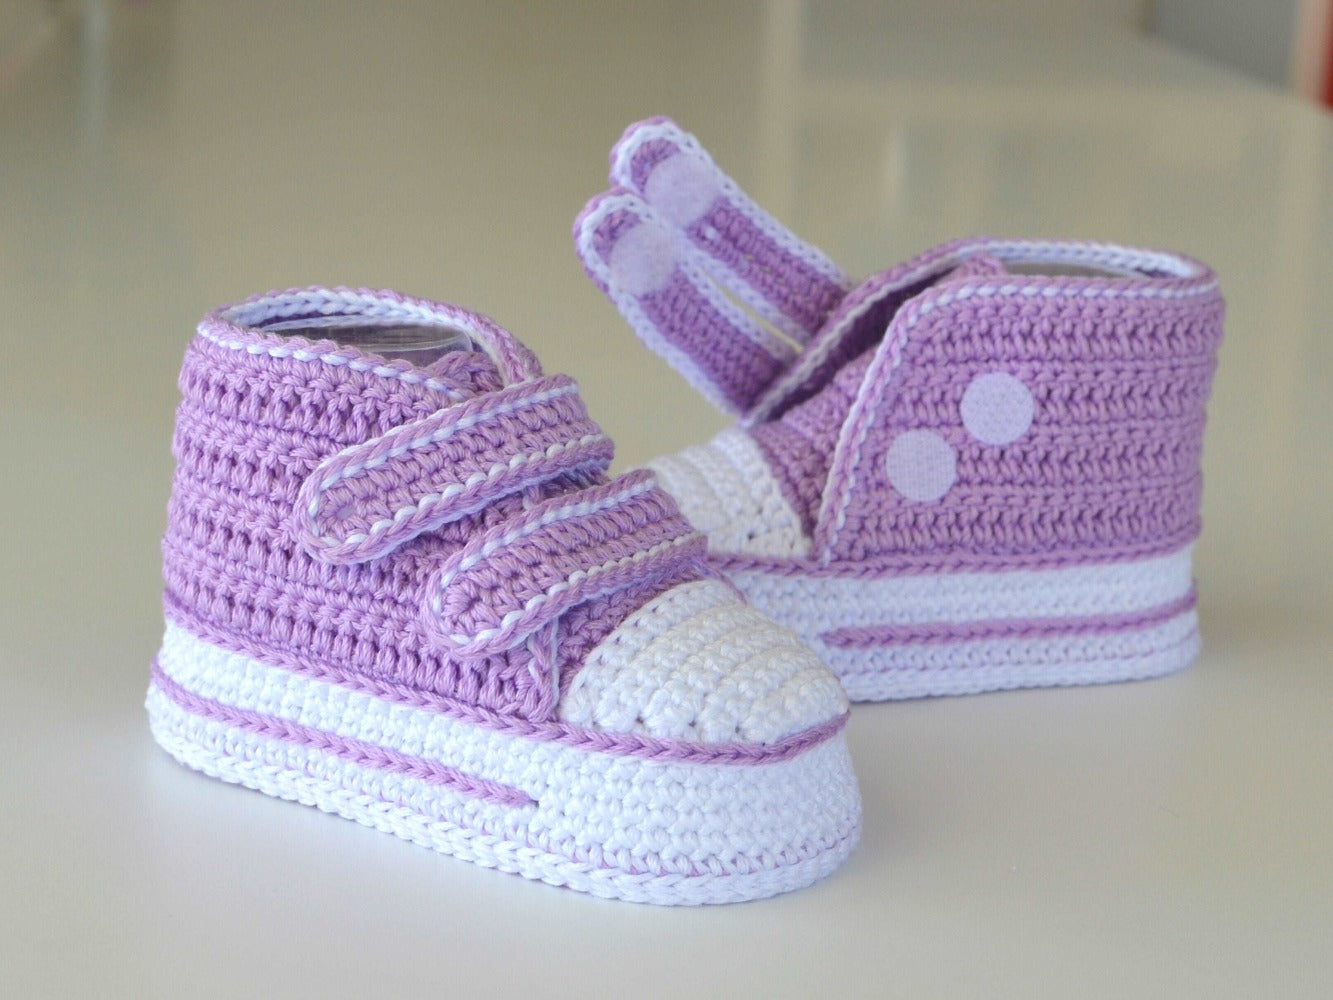 Stylish crochet baby shoes with dual hook-and-loop closure.